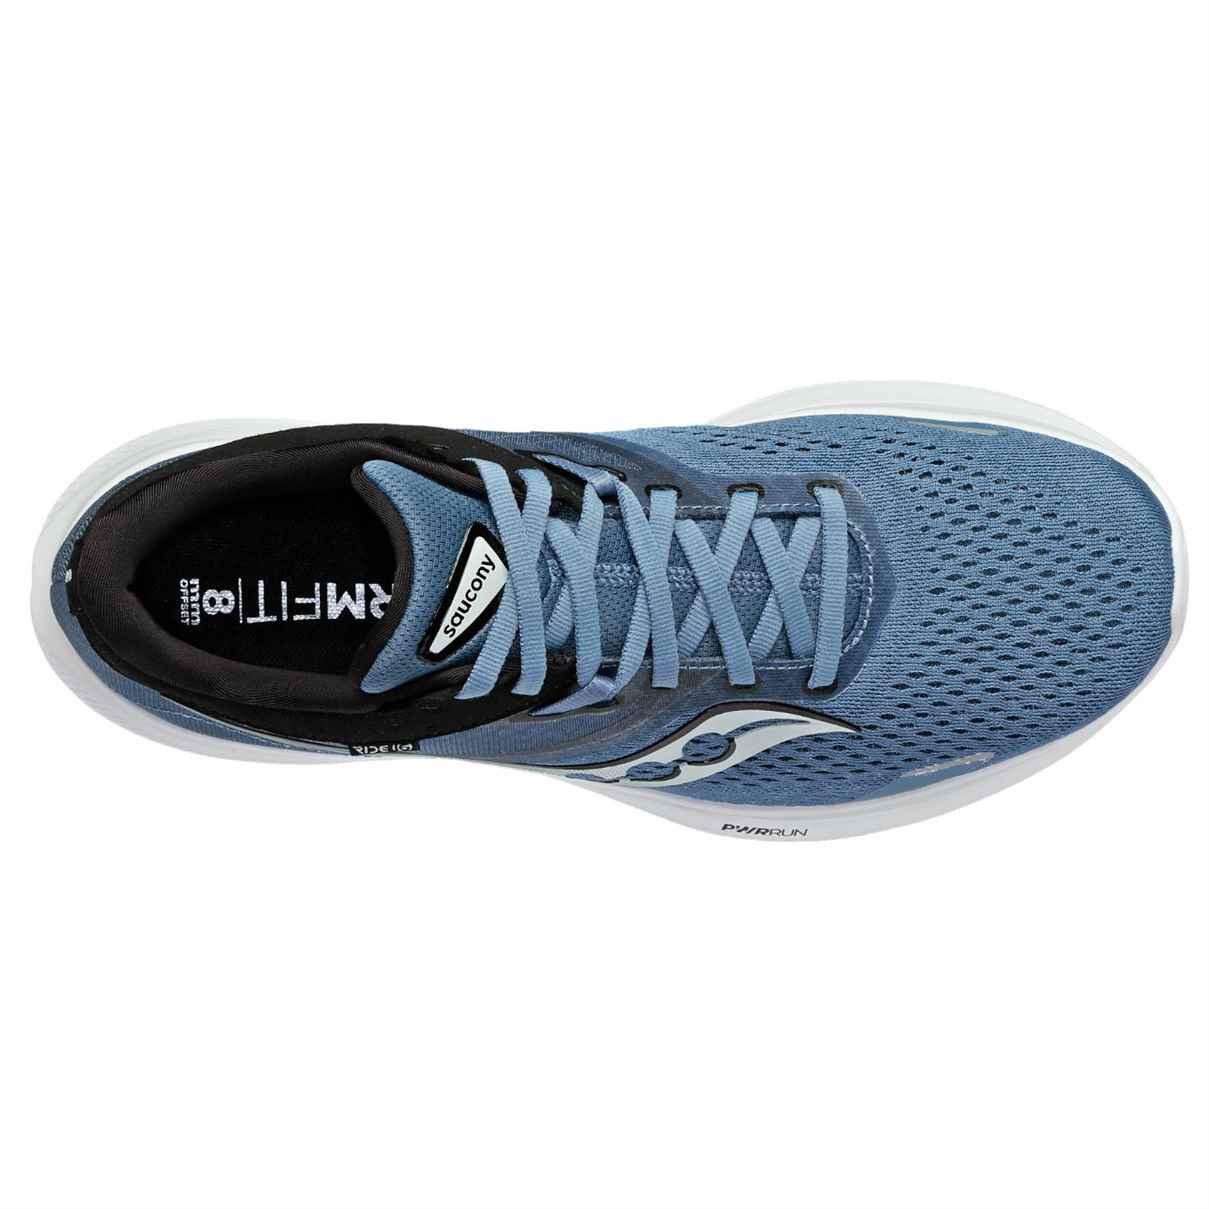 SAUCONY RIDE 16 MENS RUNNING SHOES